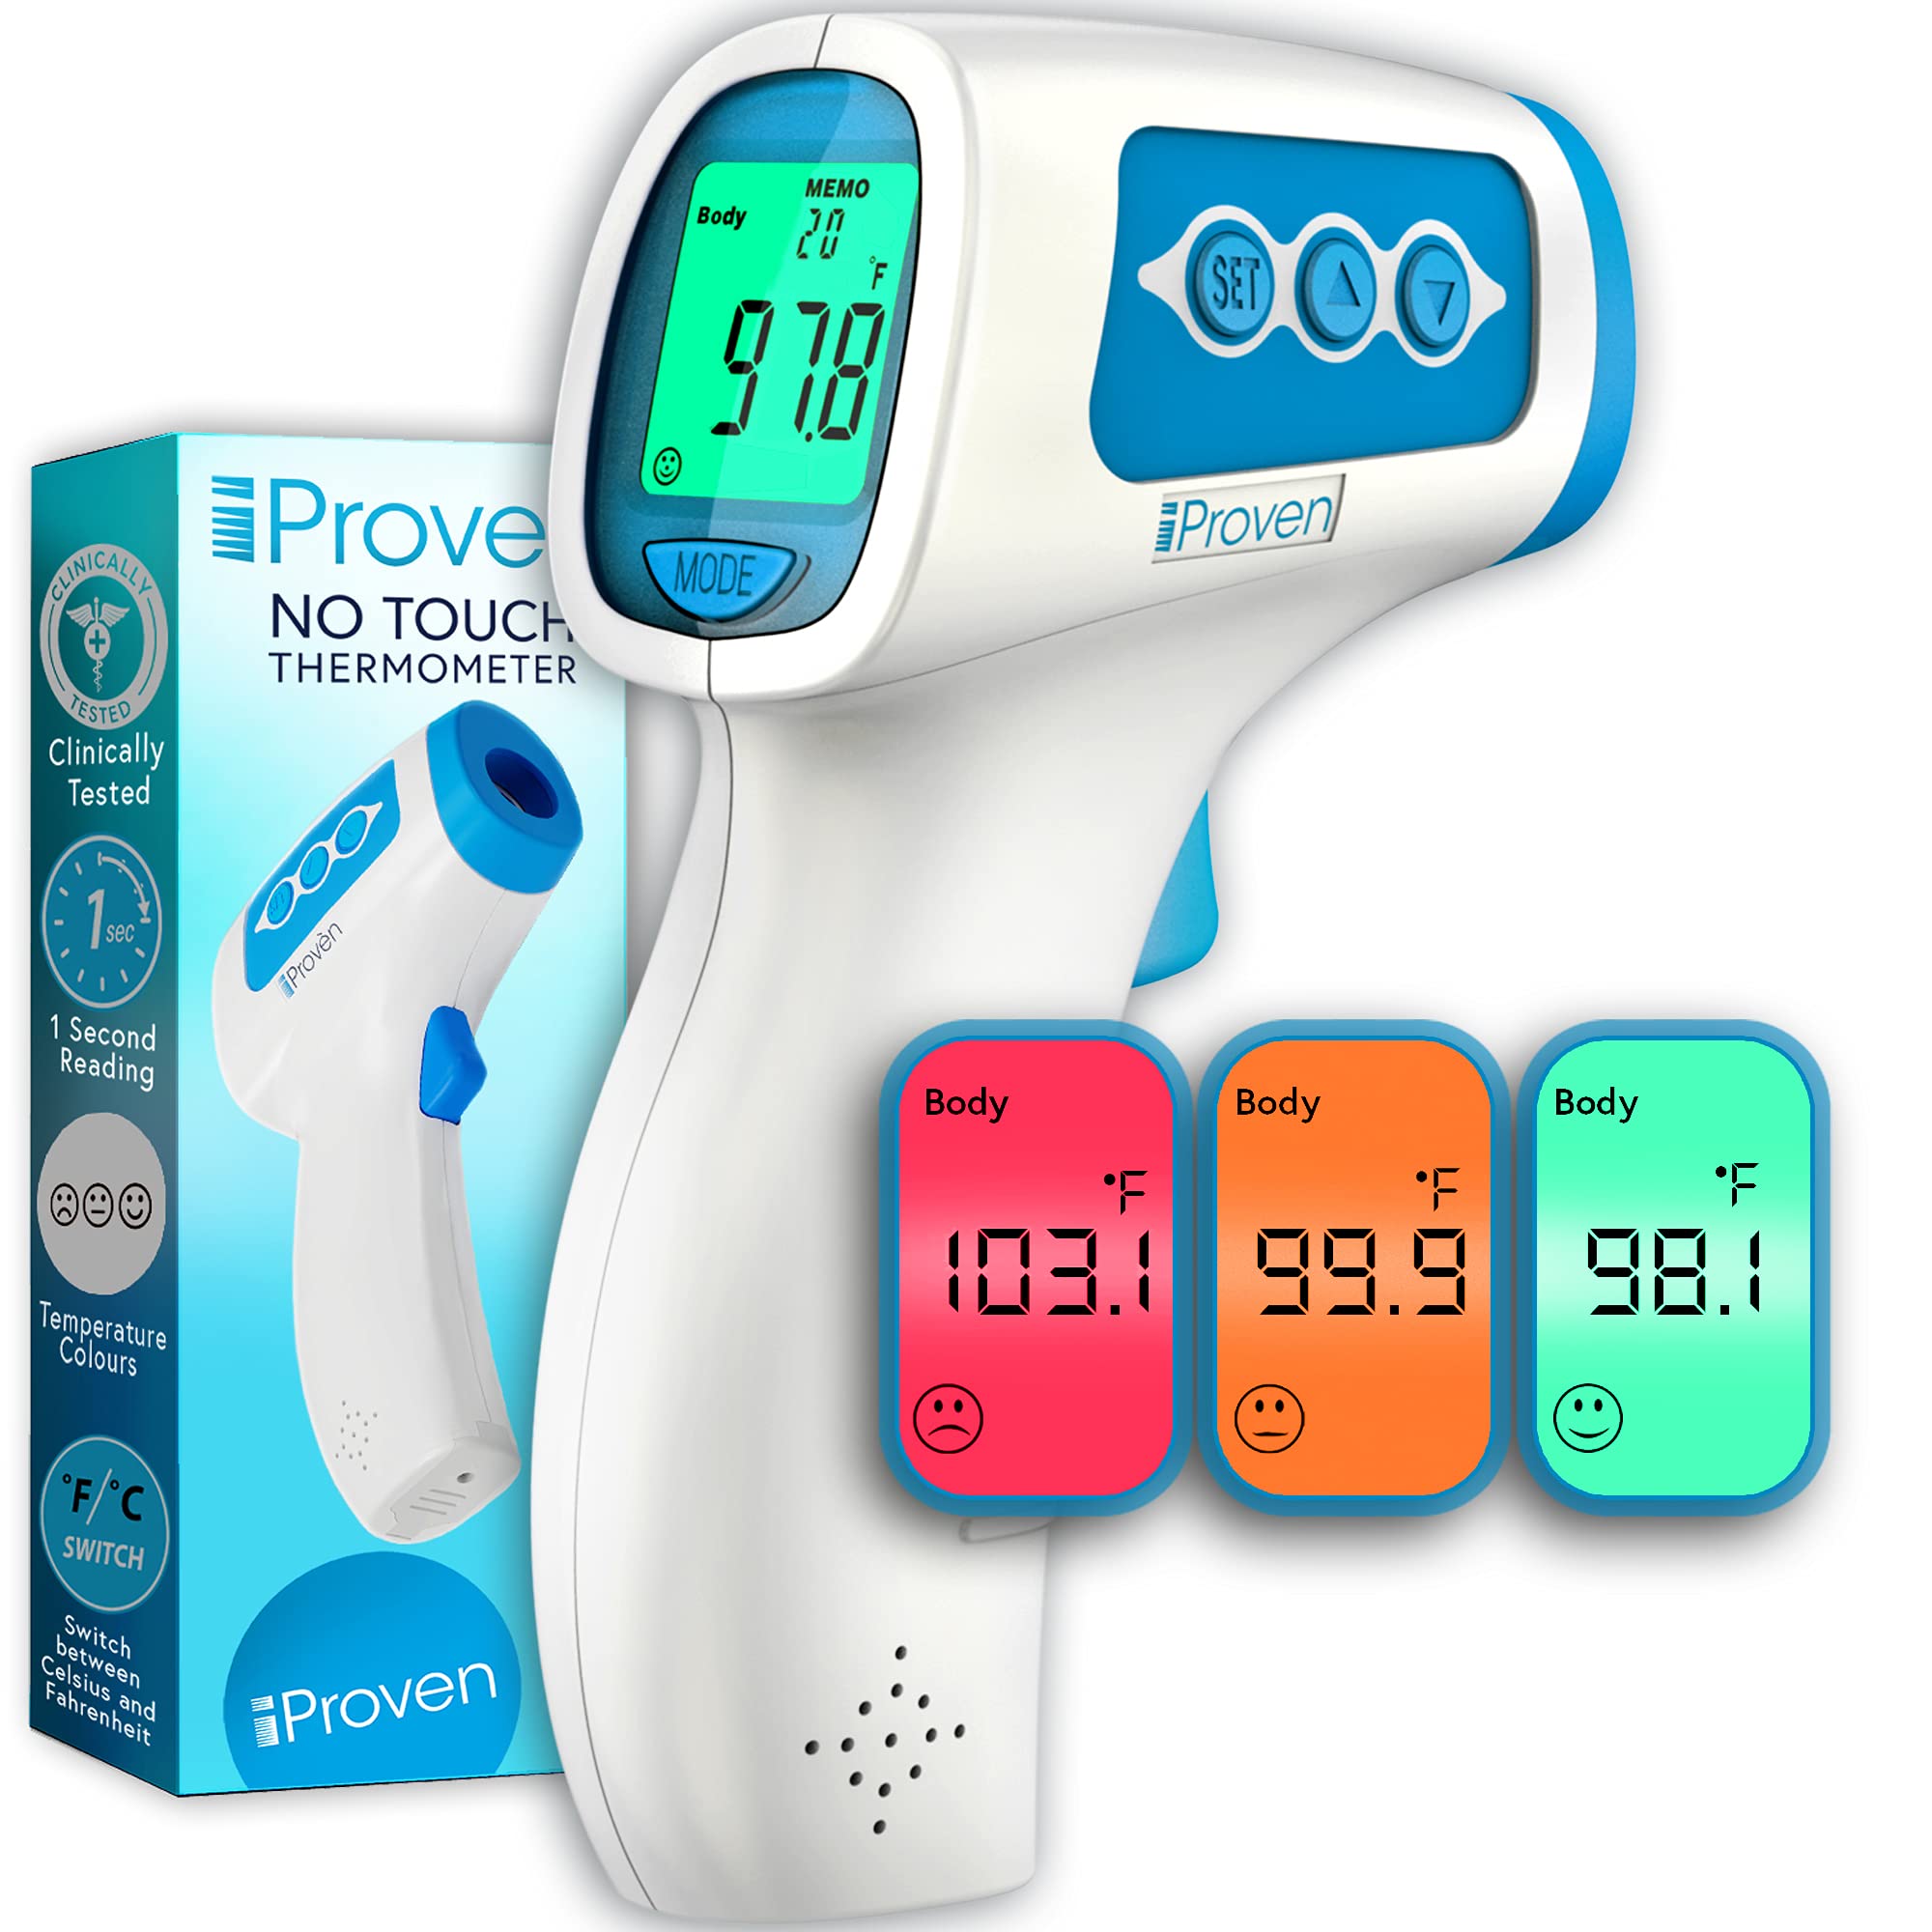 Quicktemp Digital Thermometer